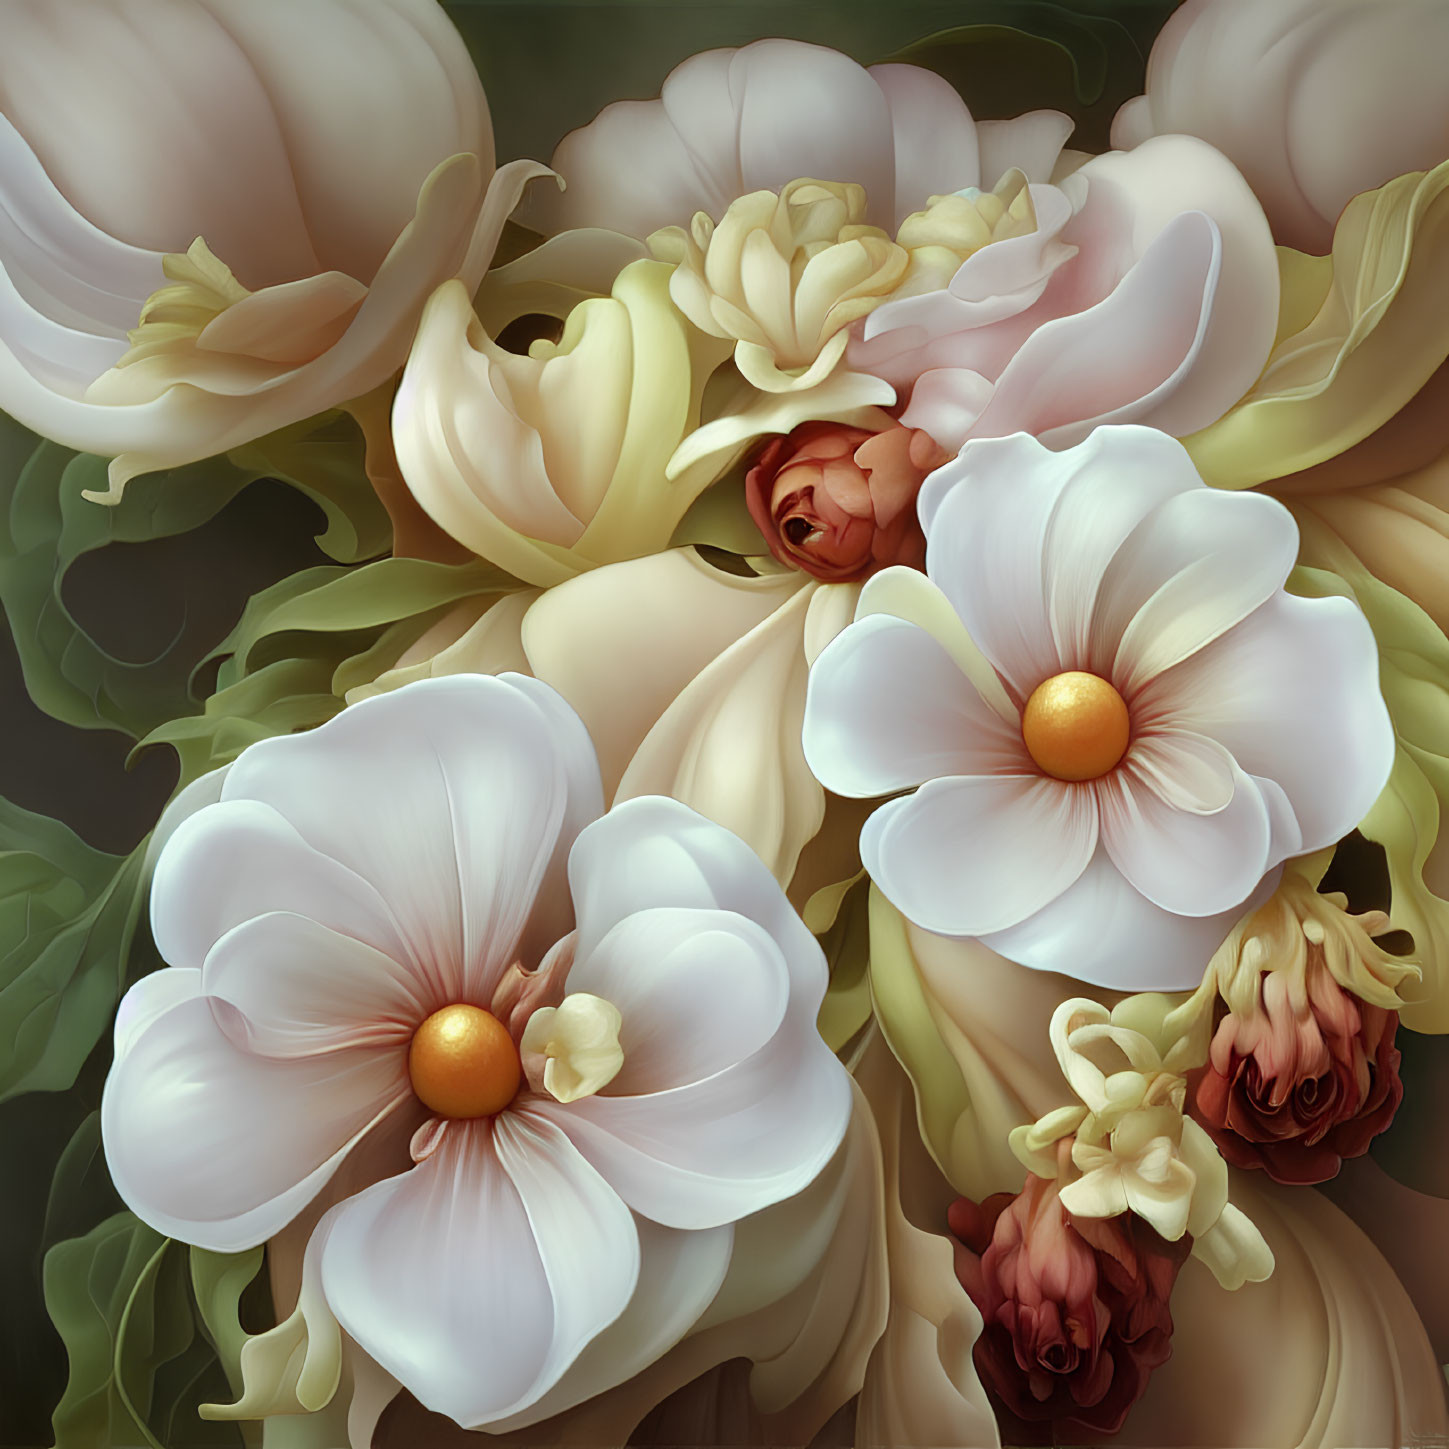 Detailed Illustration of White and Cream Flowers with Lush Green Foliage